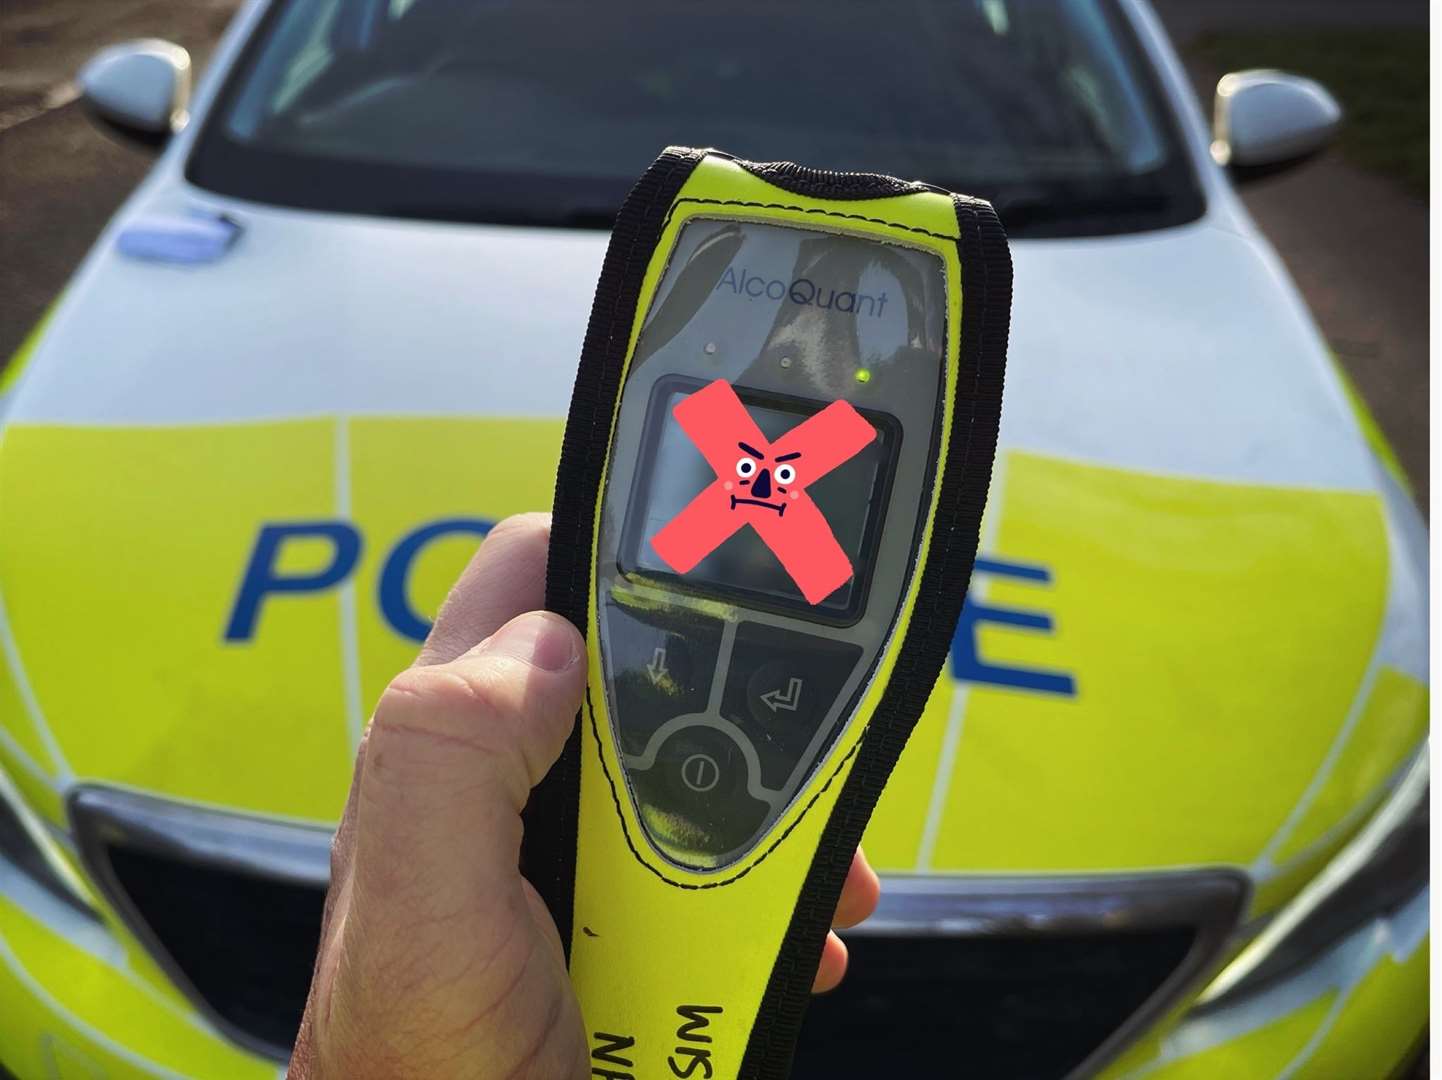 Many motorists gave readings greater than the legal drink-drive limit